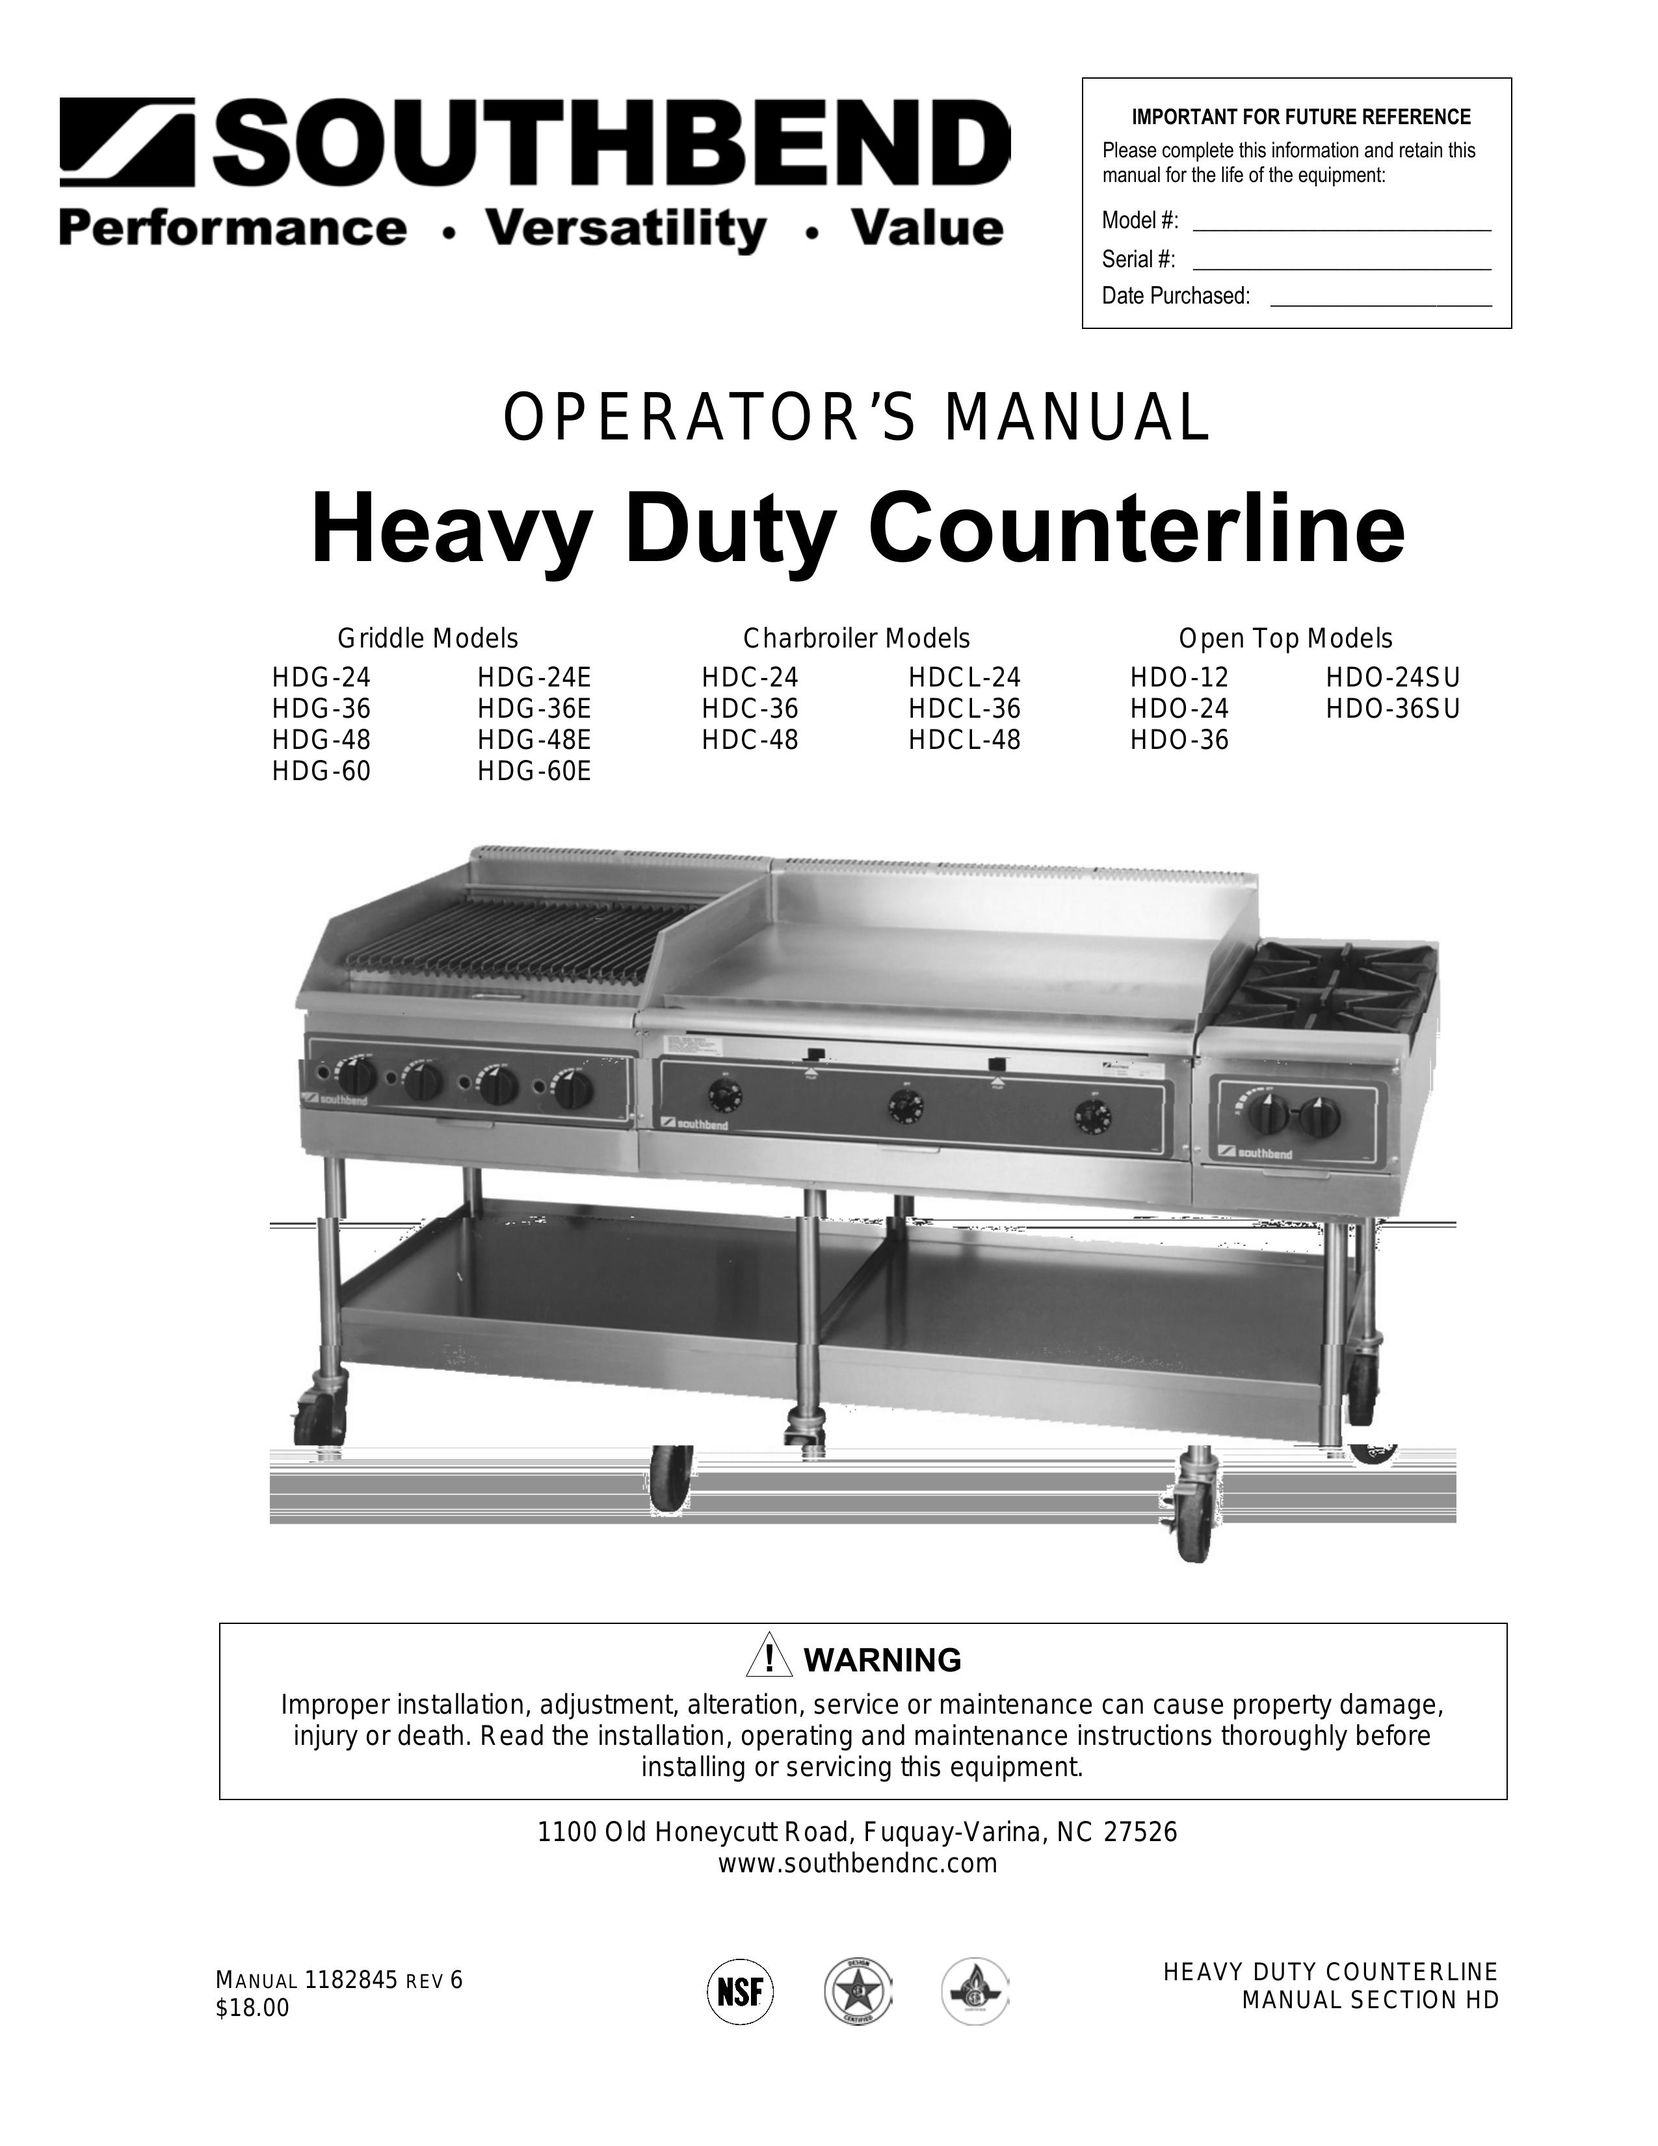 Southbend HDG-60E Cooktop User Manual